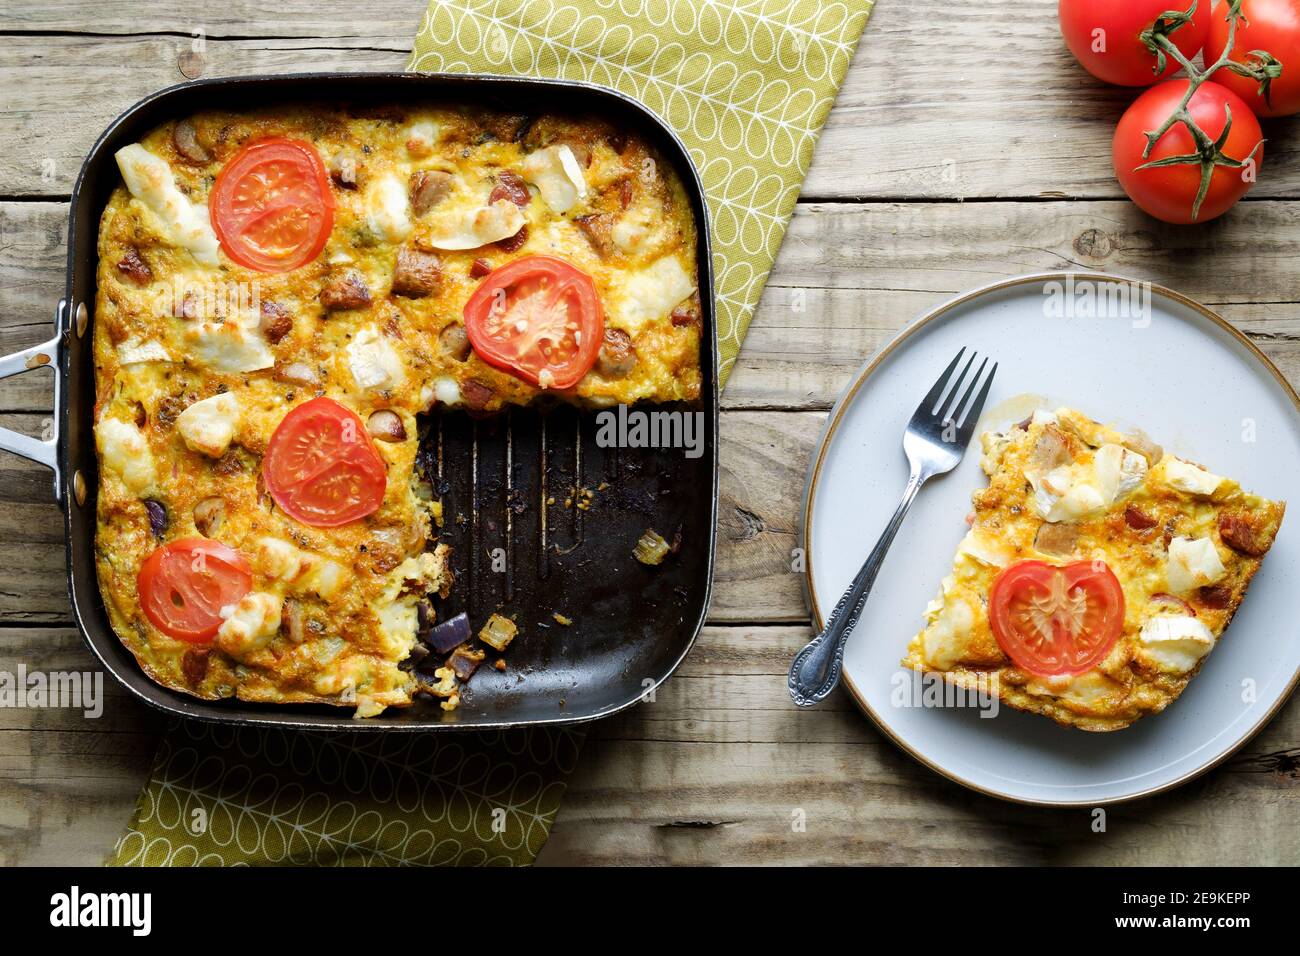 A freshly made Goat Cheese Frittata. The full Frittata is shown in the cooking pan with a slice onesie plate. An egg based healthy eating option Stock Photo